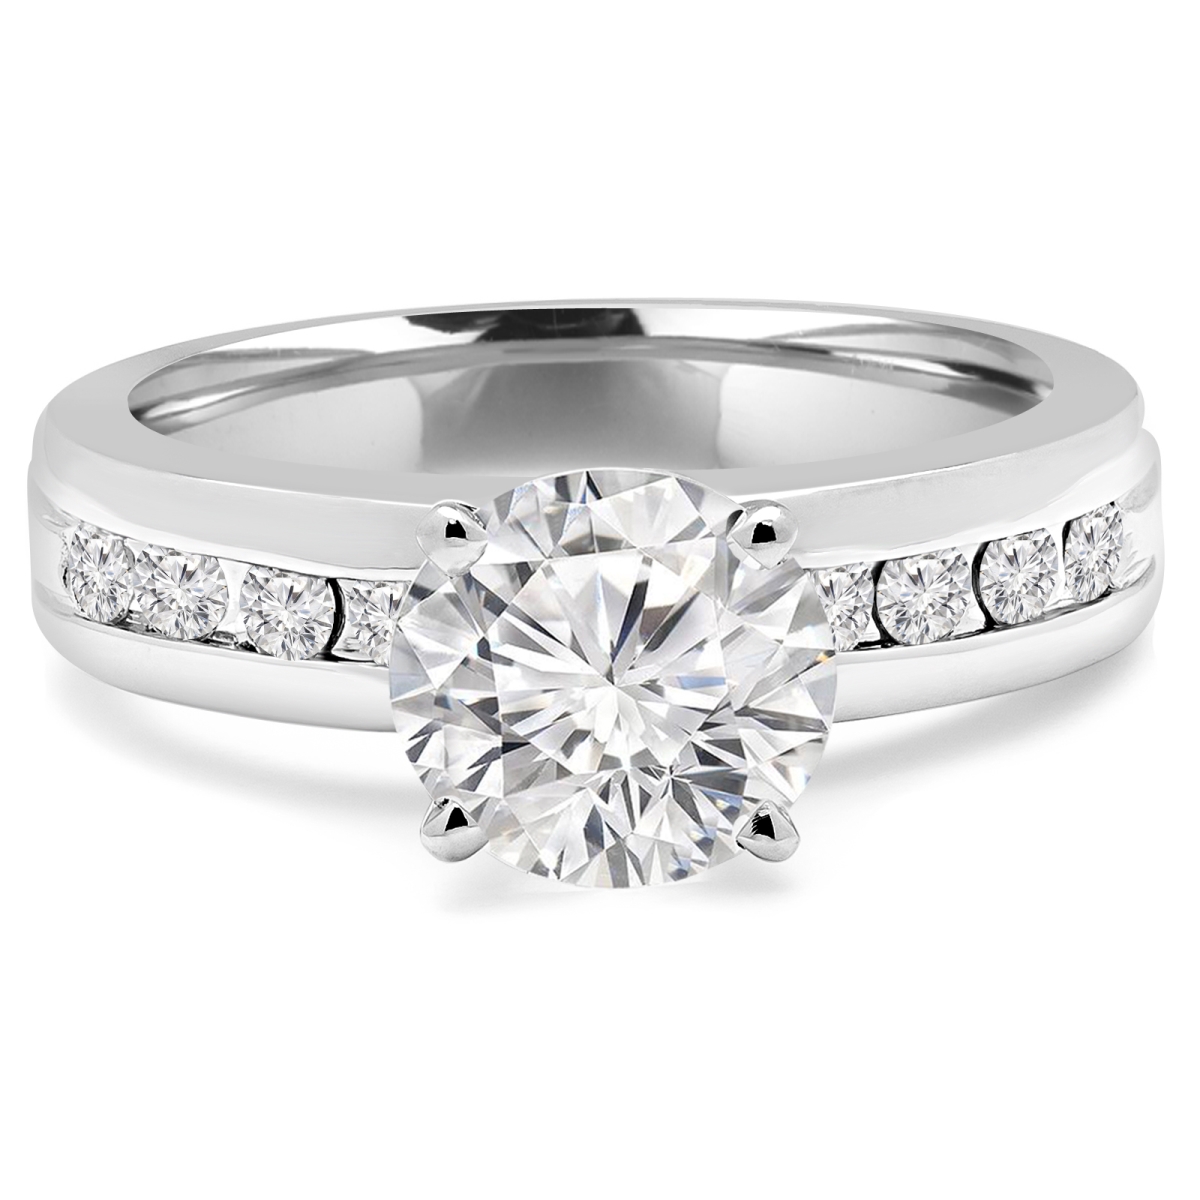 MD210145-9 1.4 CTW Round Diamond Solitaire Engagement Ring with Channel Set Accents in 14K White Gold - Size 9 -  Majesty Diamonds